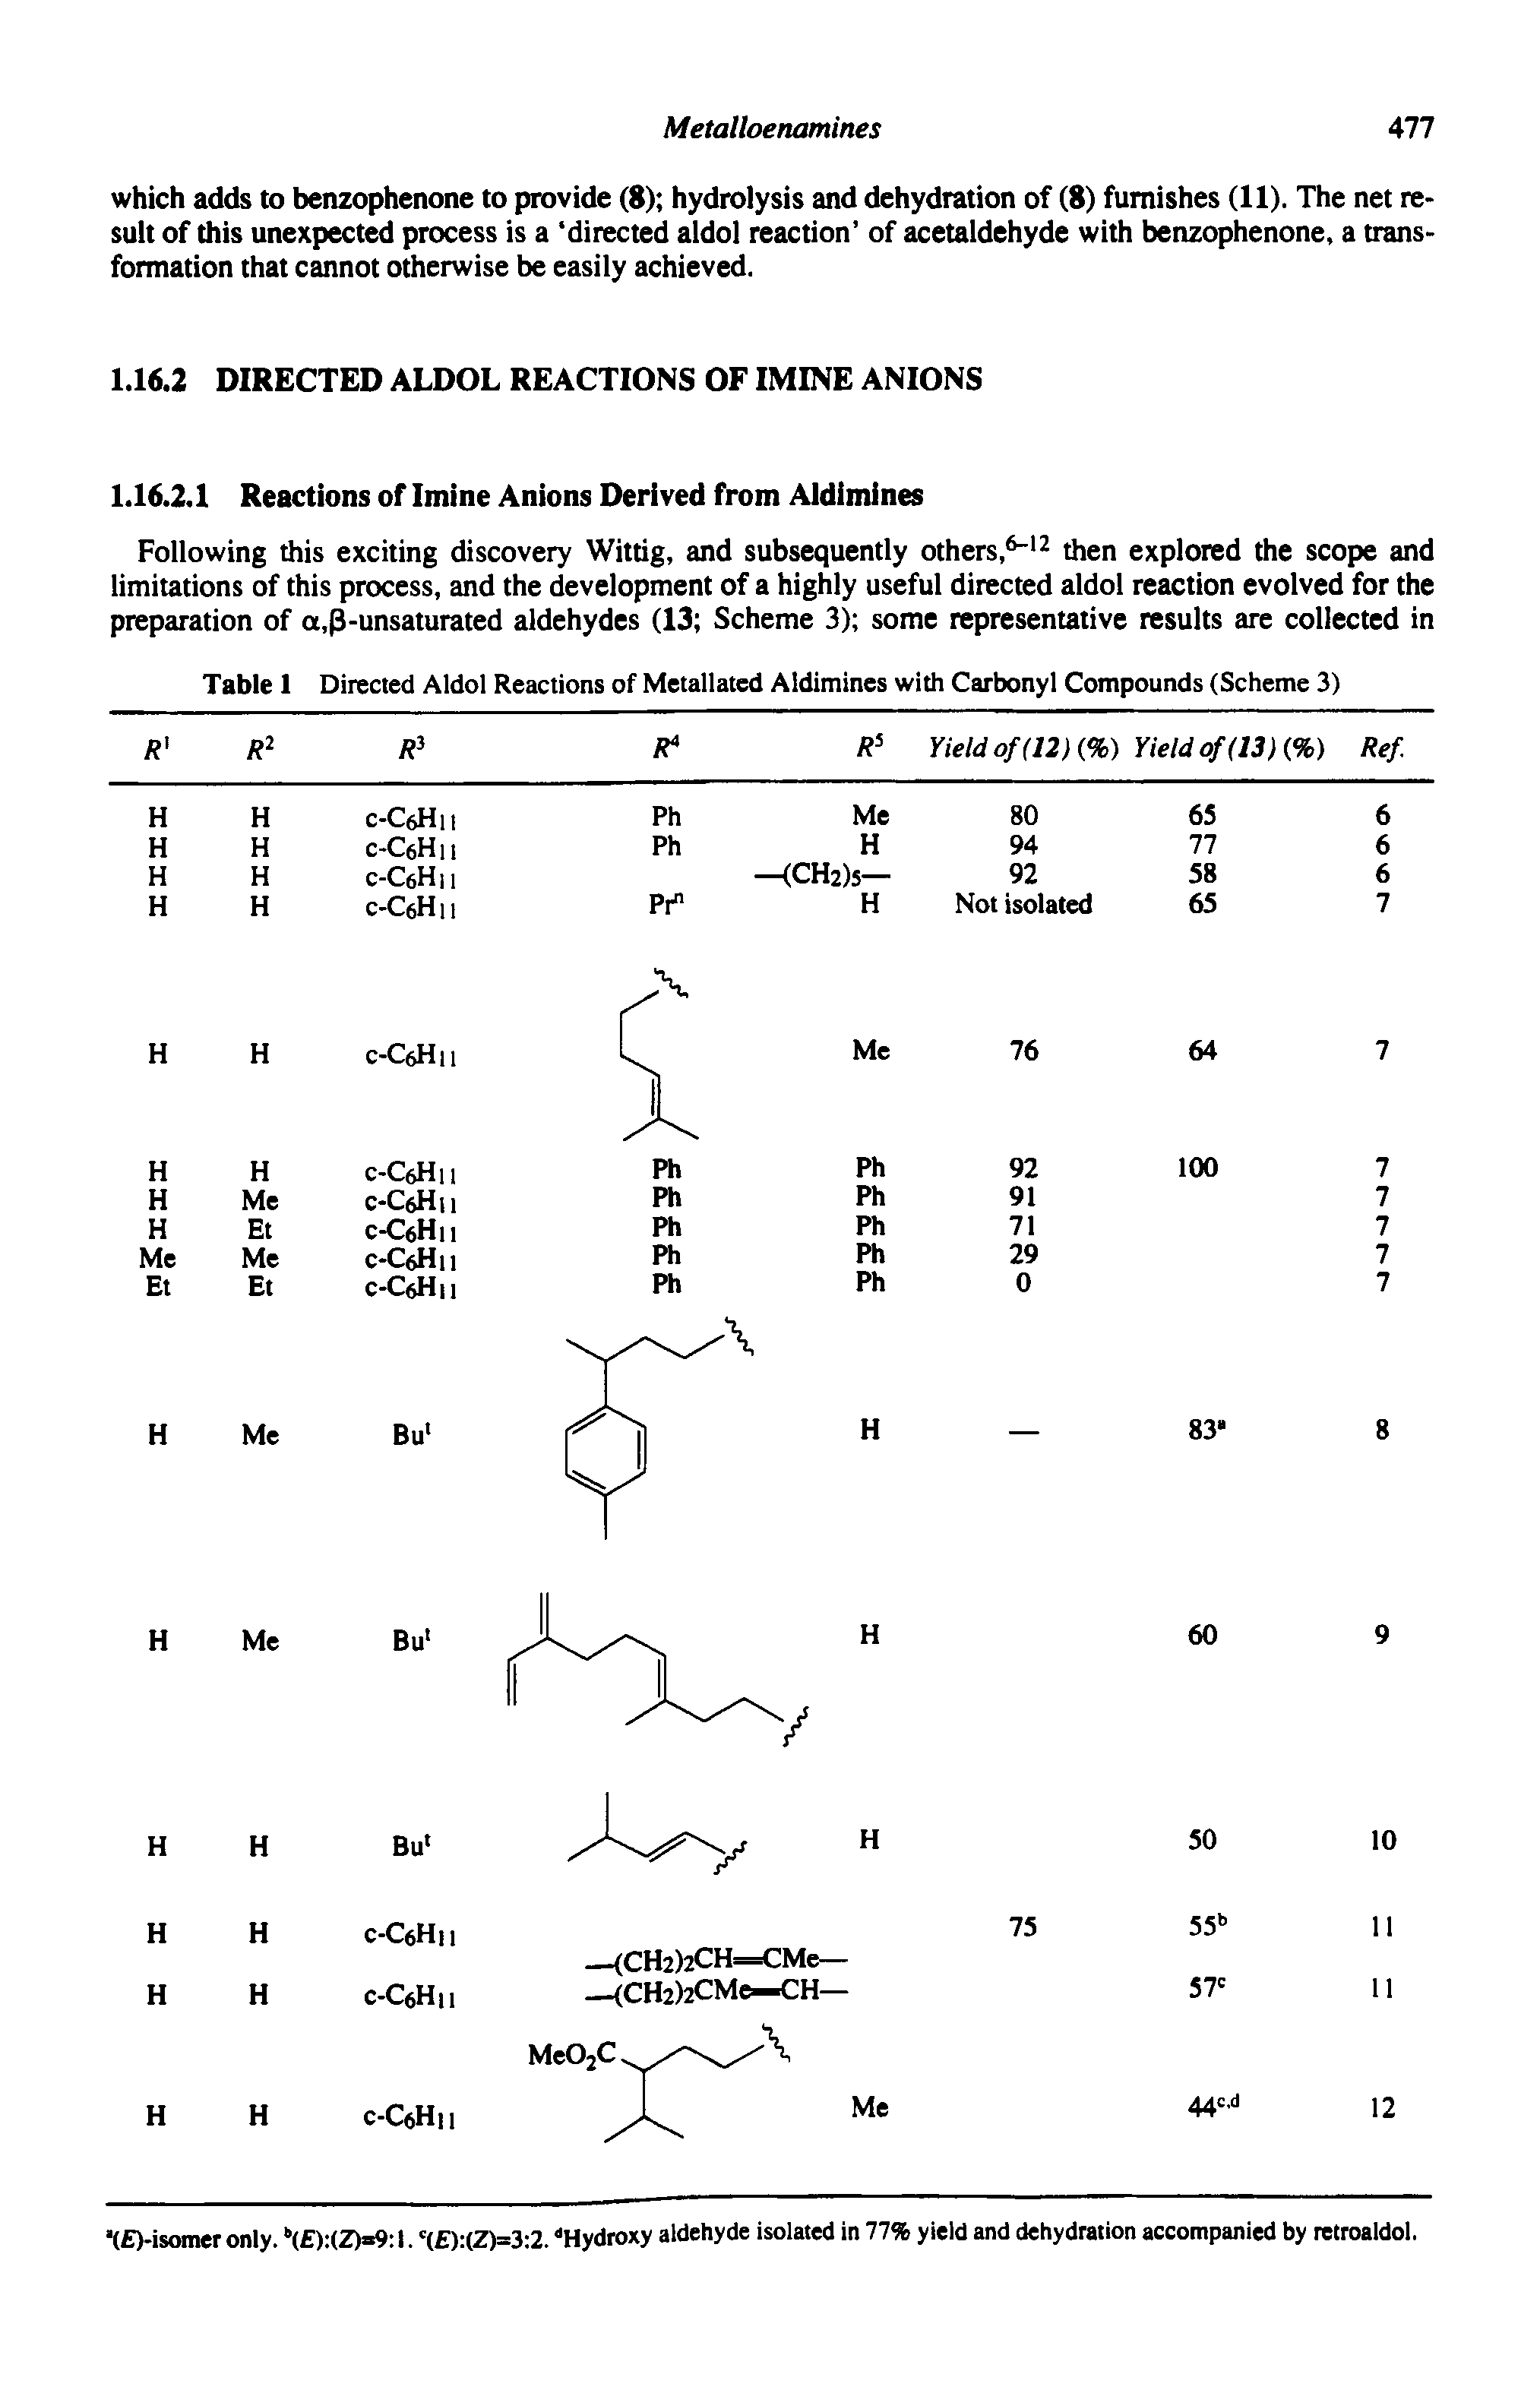 Table 1 Directed Aldol Reactions of Metallated Aldimines with Carbonyl Compounds (Scheme 3)...